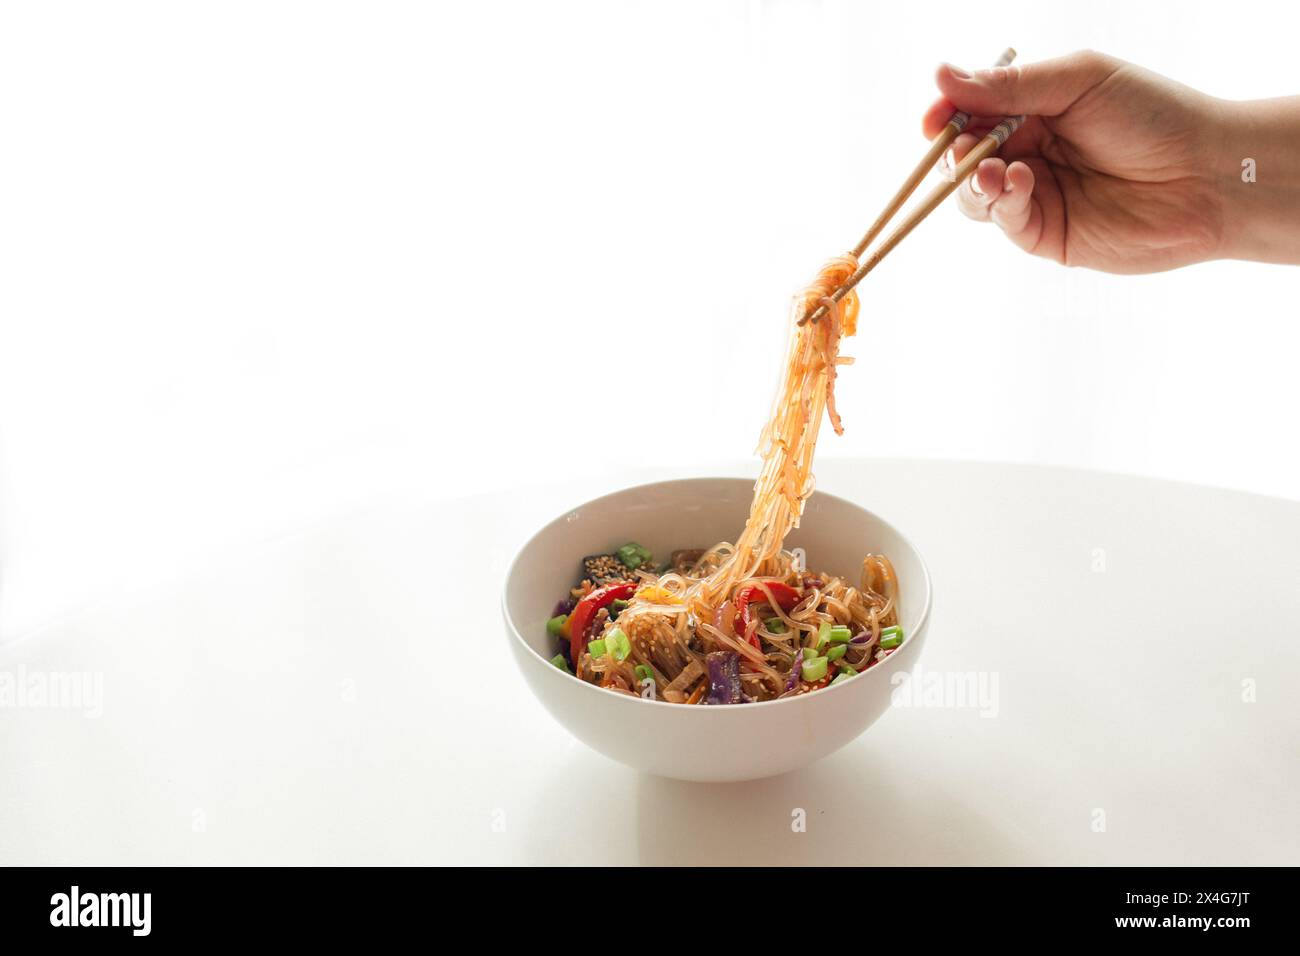 Lifting noodles from bowl with chopsticks Stock Photo